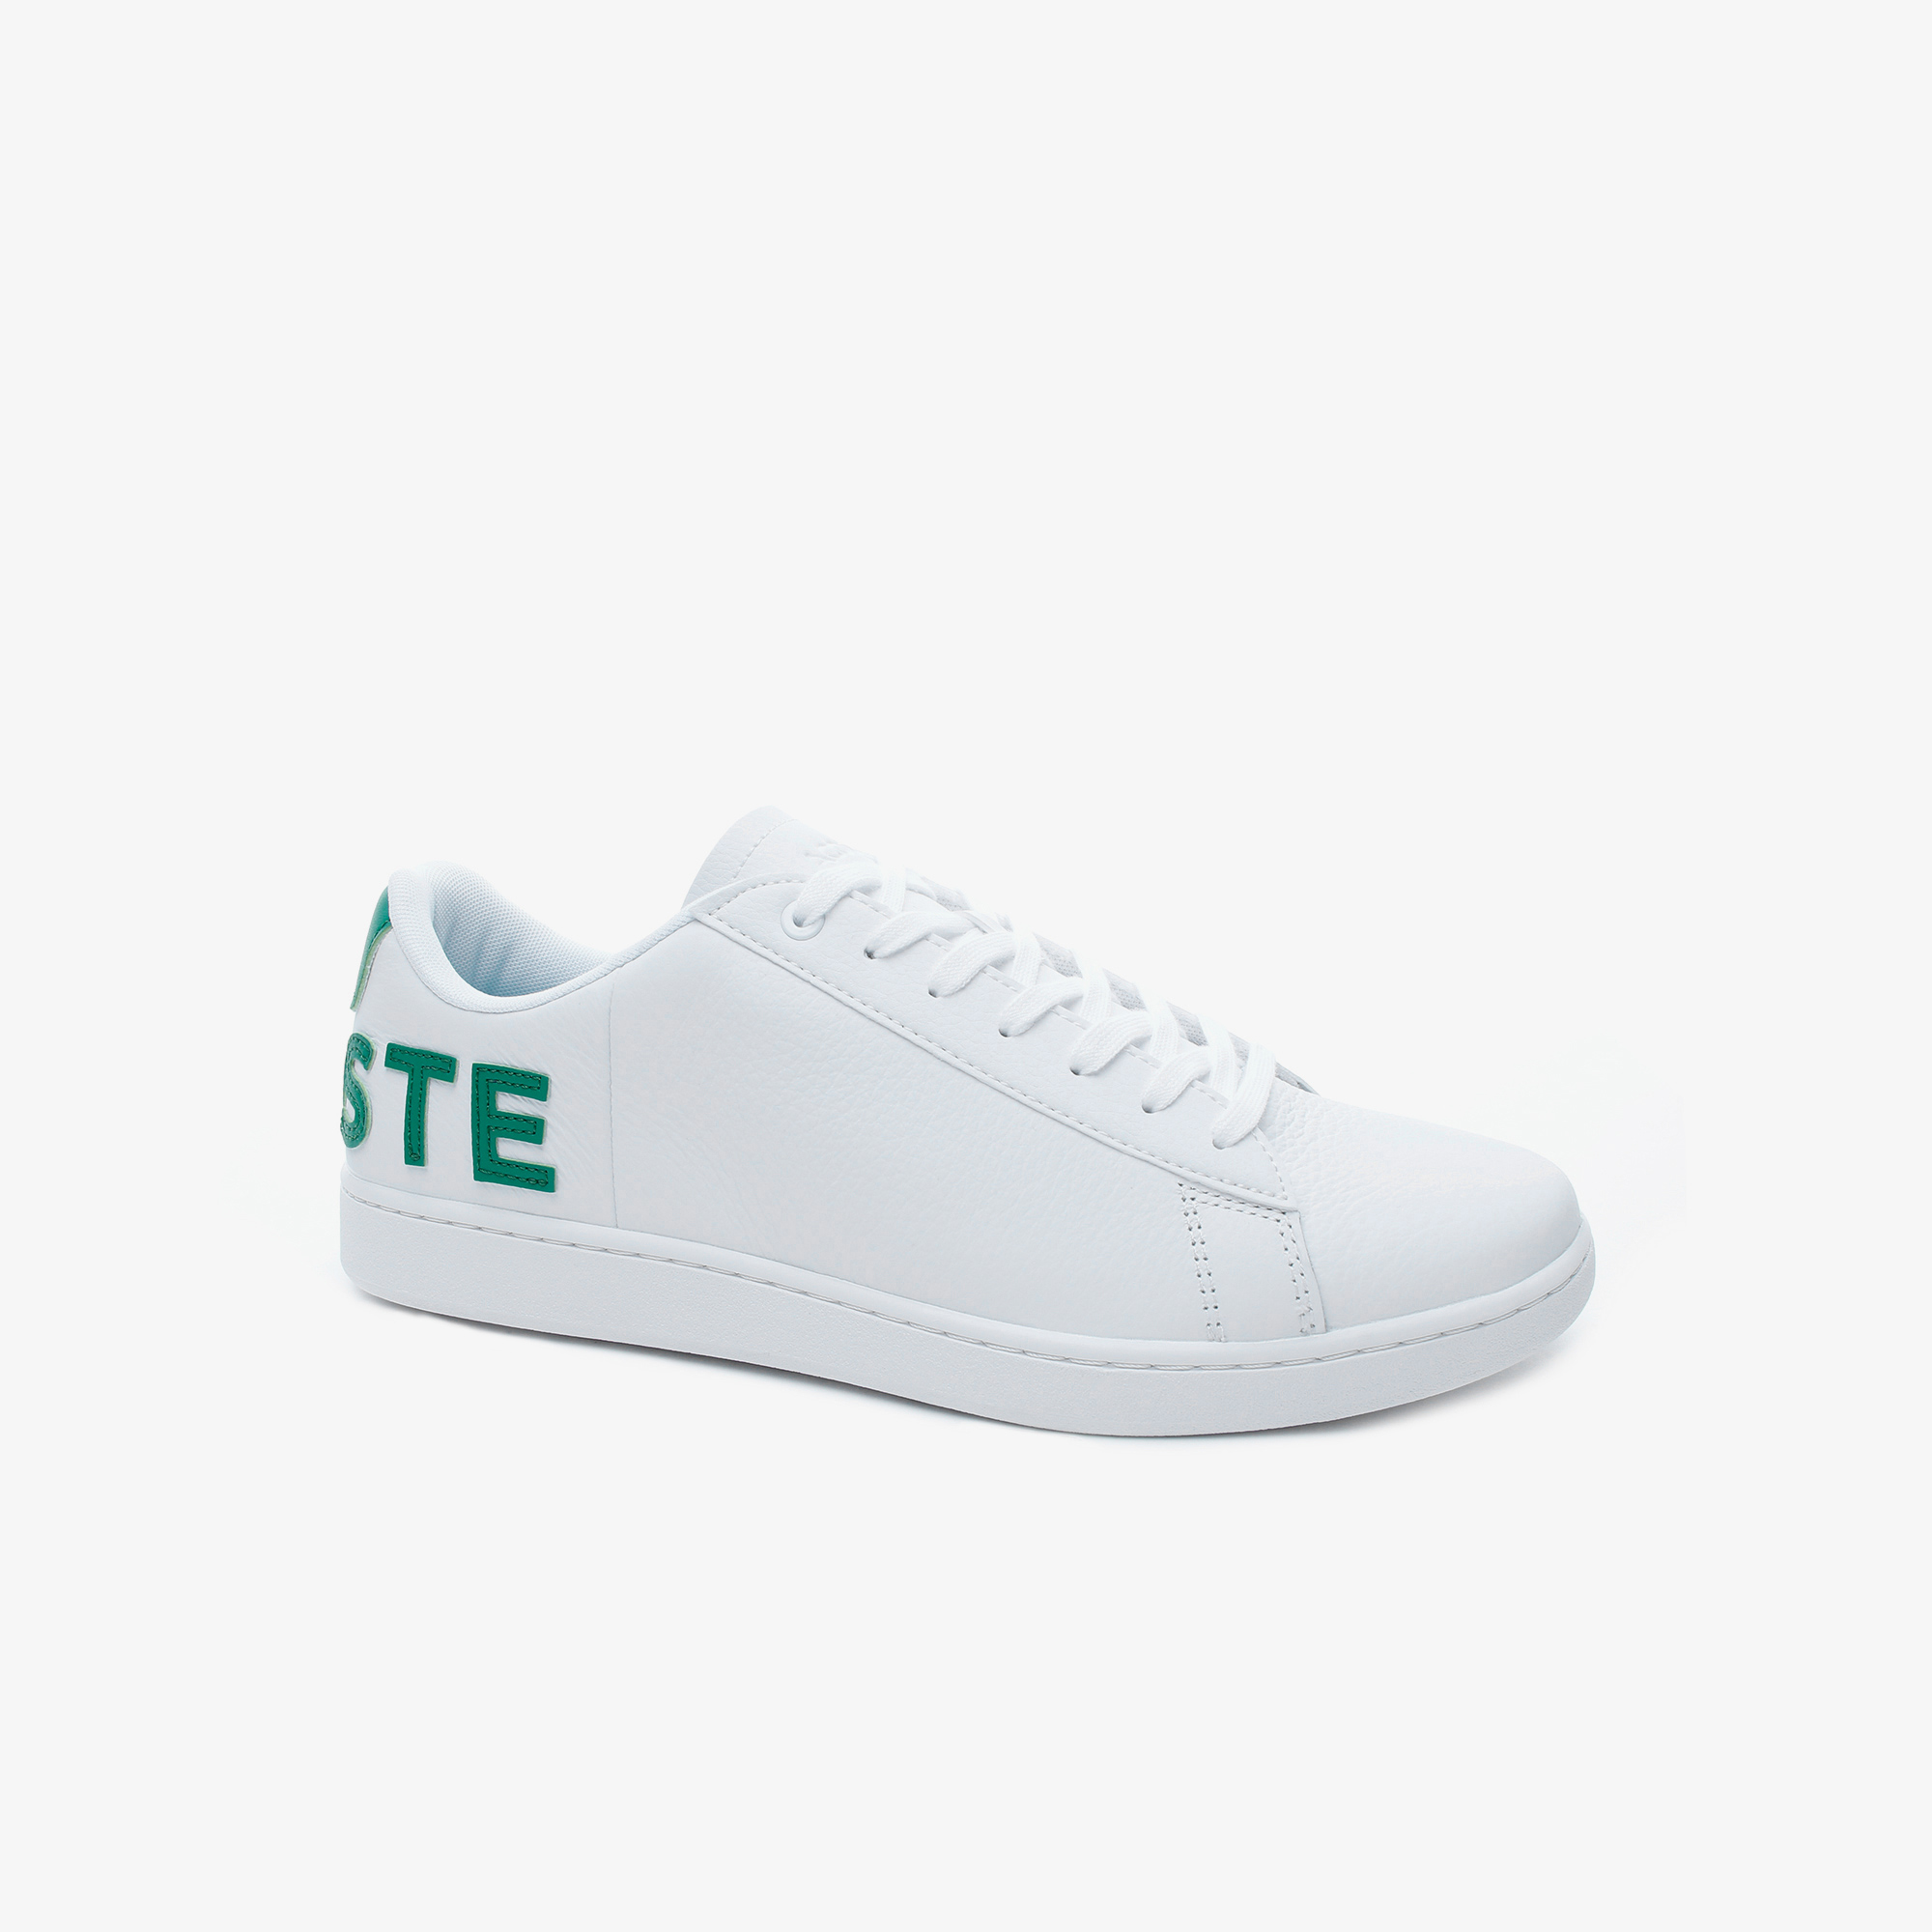 Lacoste Men's Carnaby Evo 120 7 Us Sma Leather Sneakers 739SMA0052-082 |  Lacoste